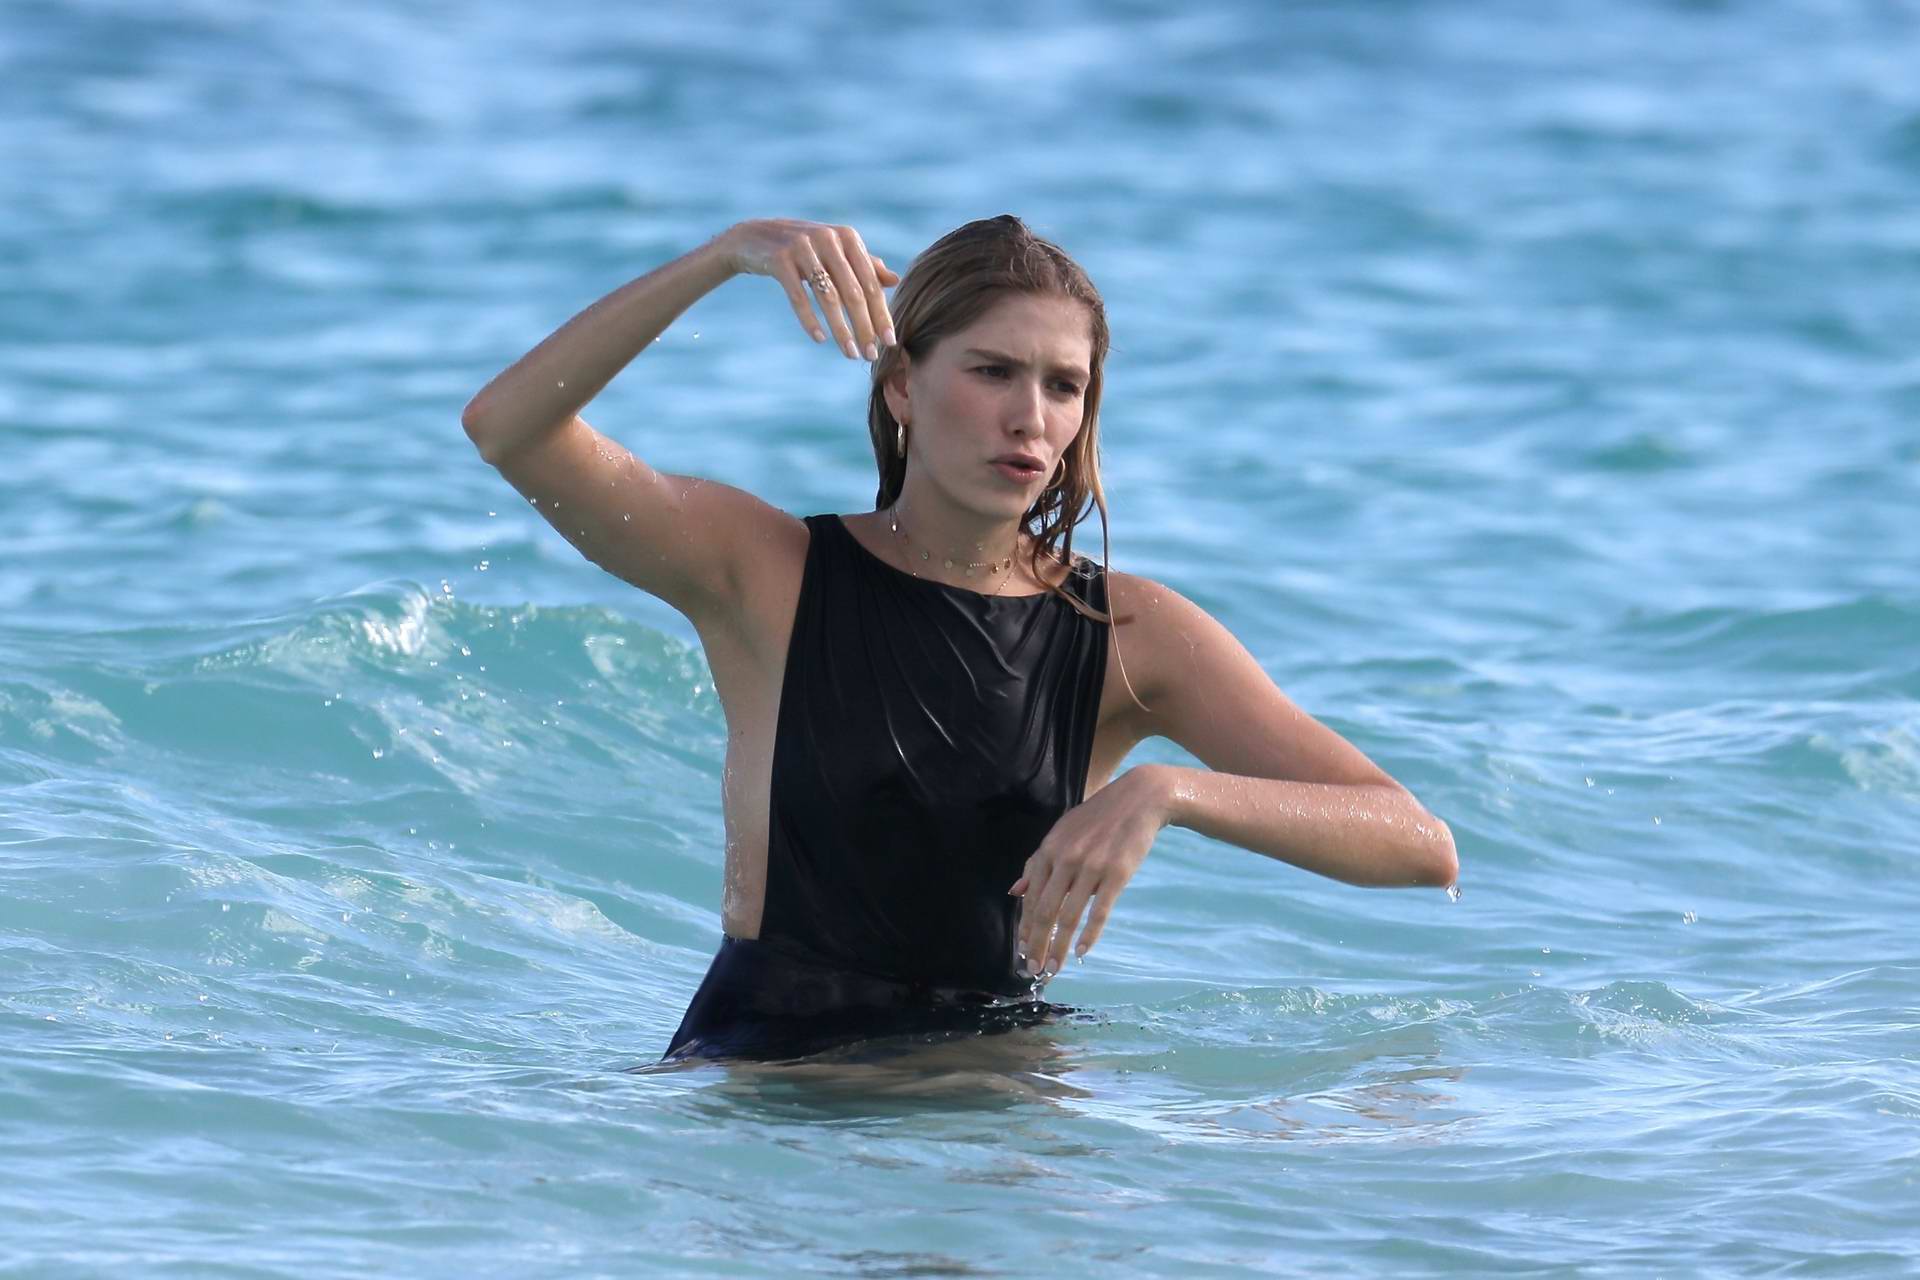 elena perminova goes for a swim in a black swimsuit during her vacation